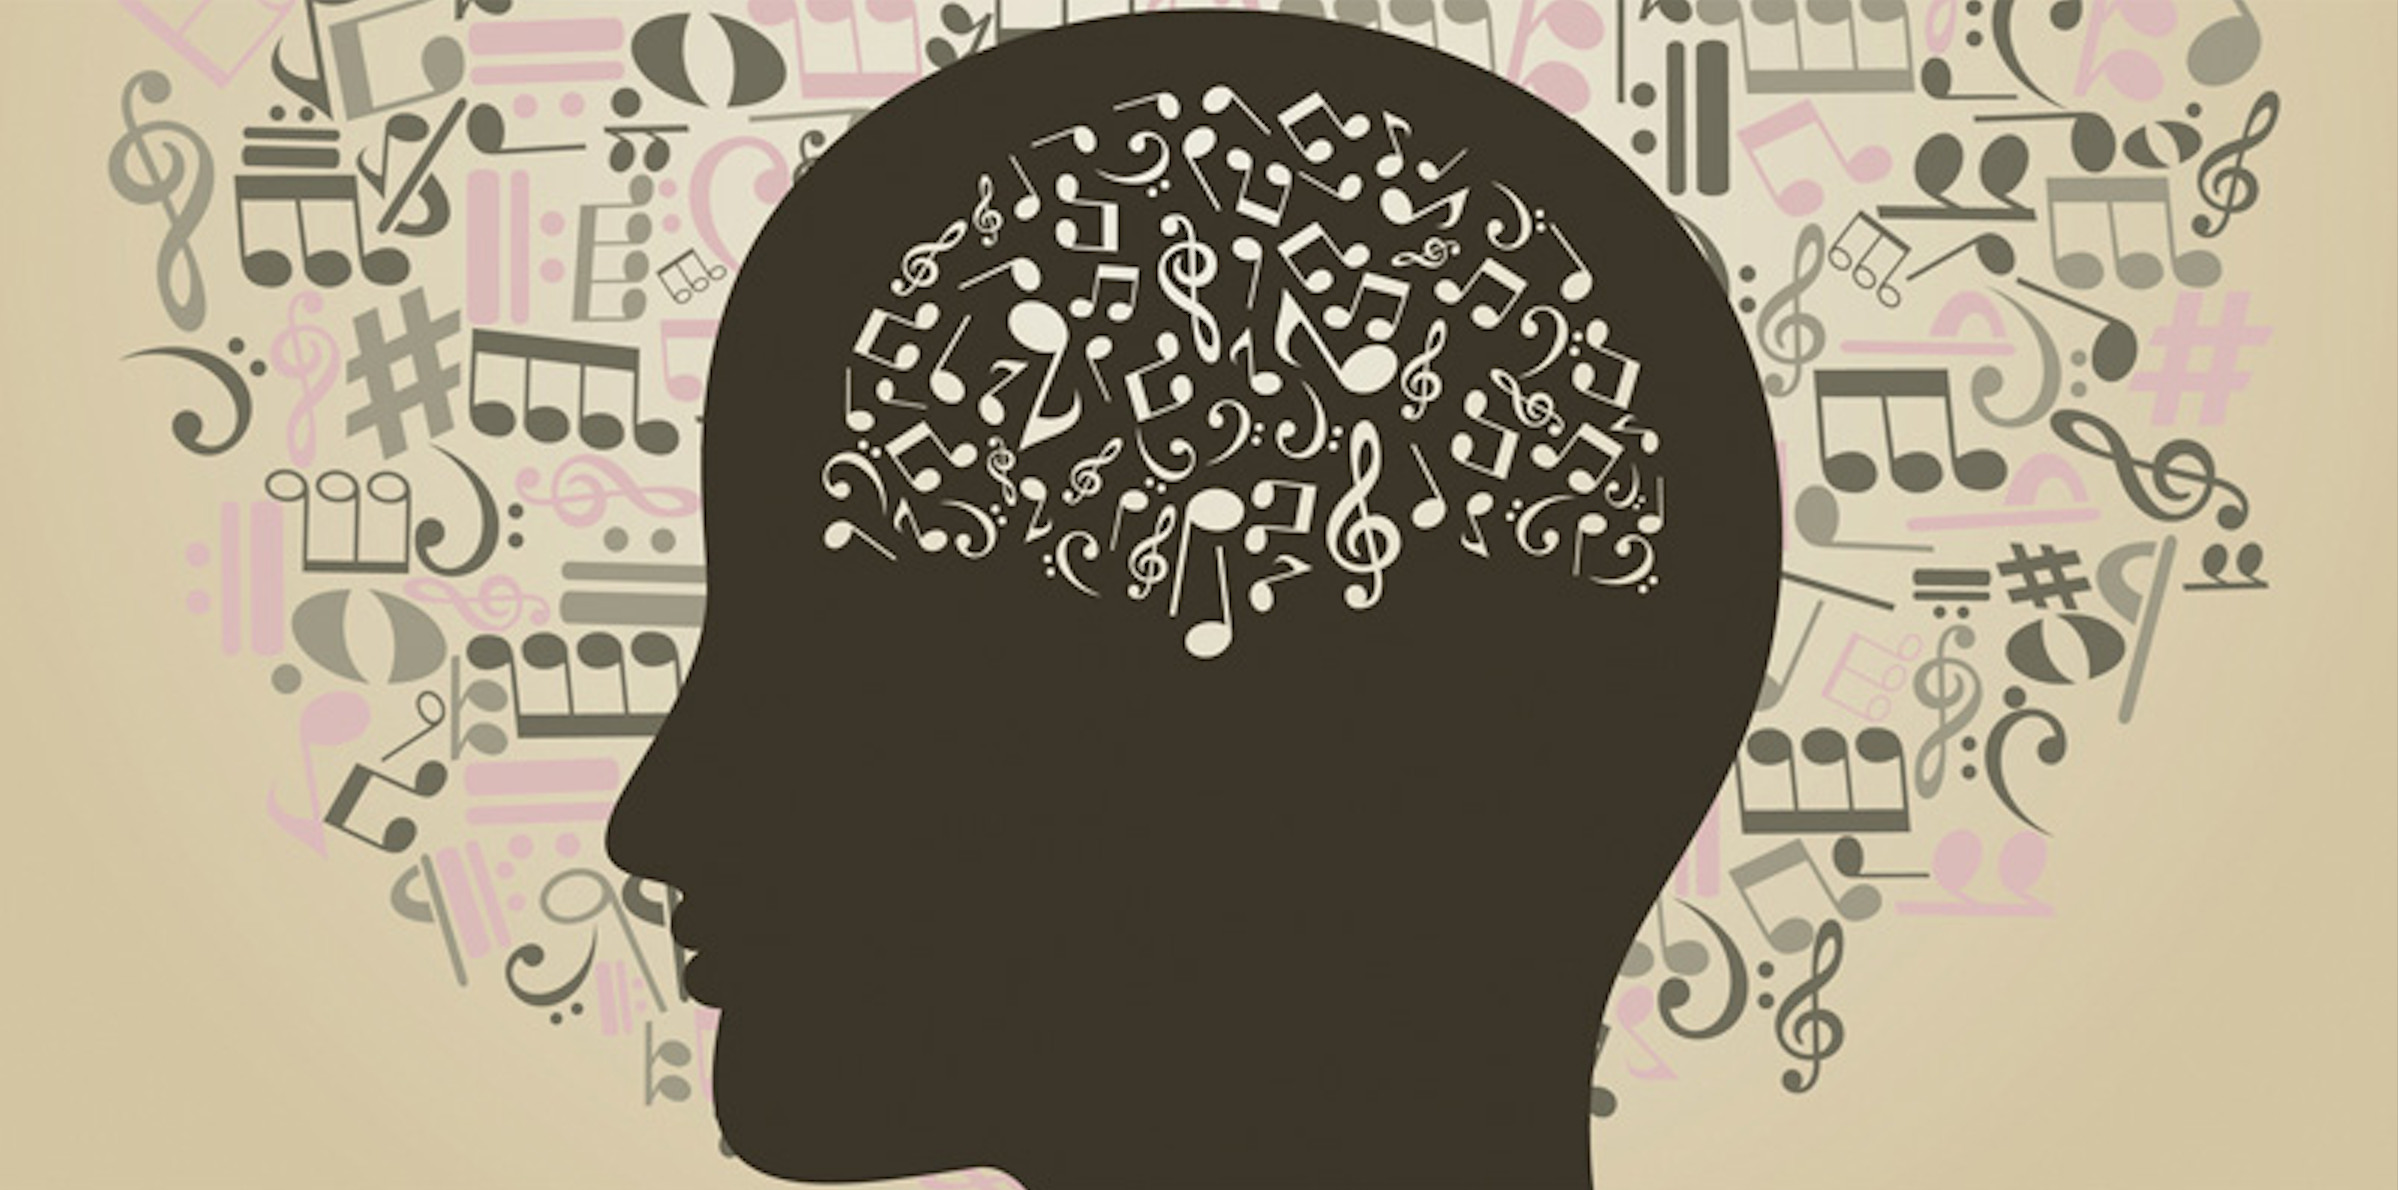 The brain and piano